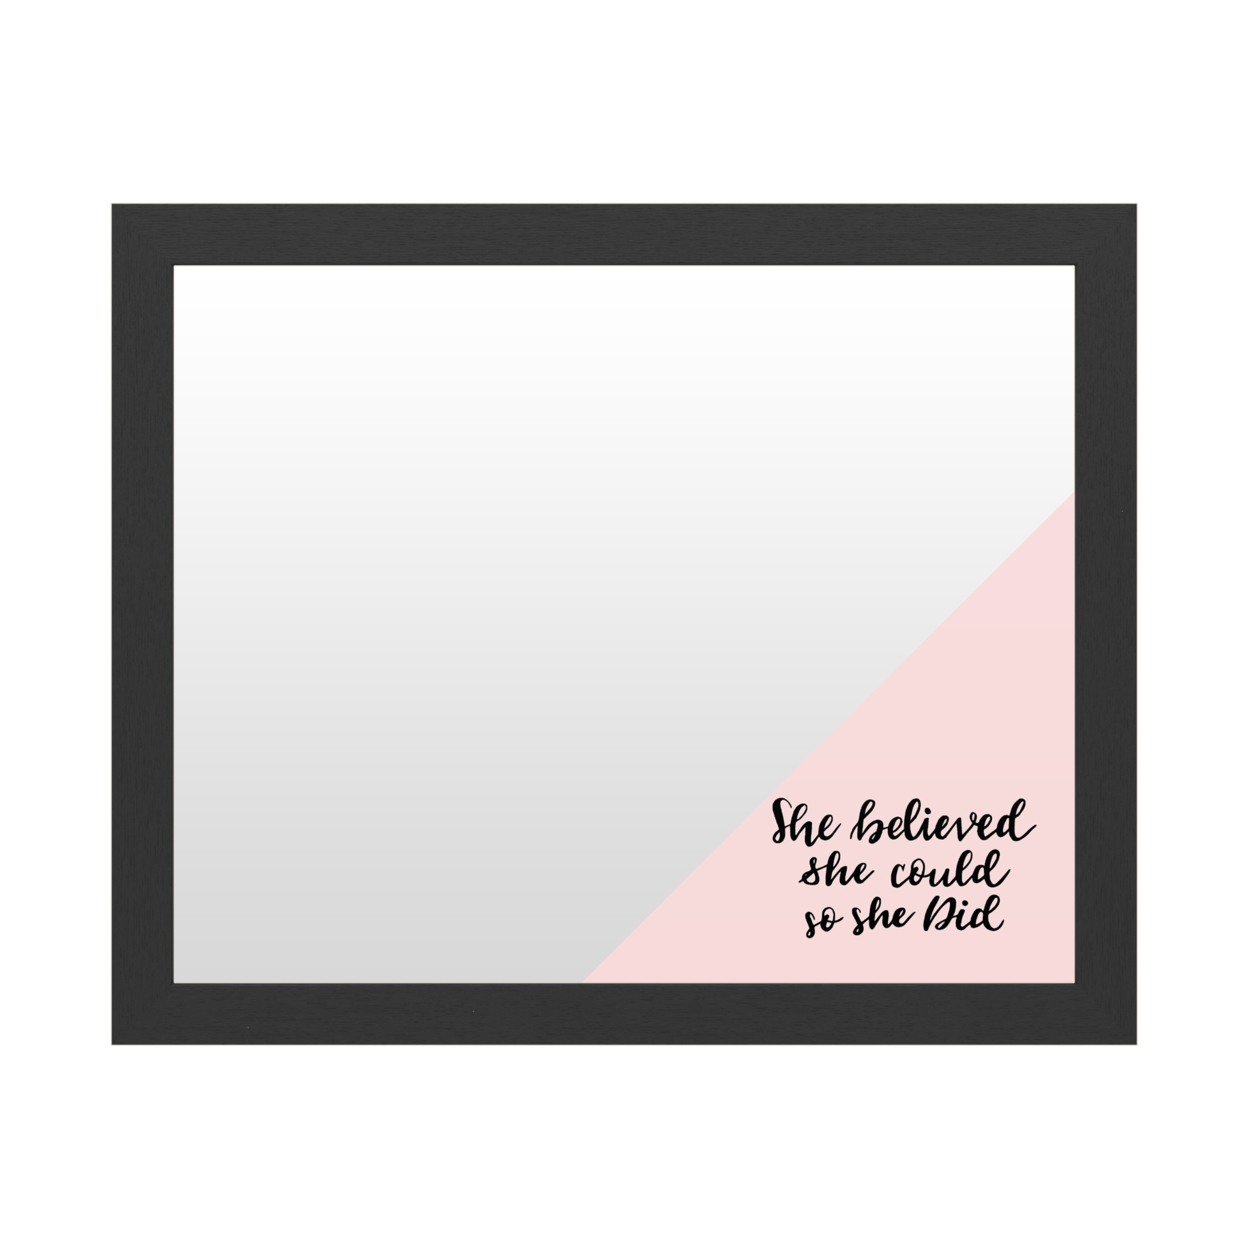 Dry Erase 16 X 20 Marker Board With Printed Artwork - She Believed She Could Pink White Board - Ready To Hang